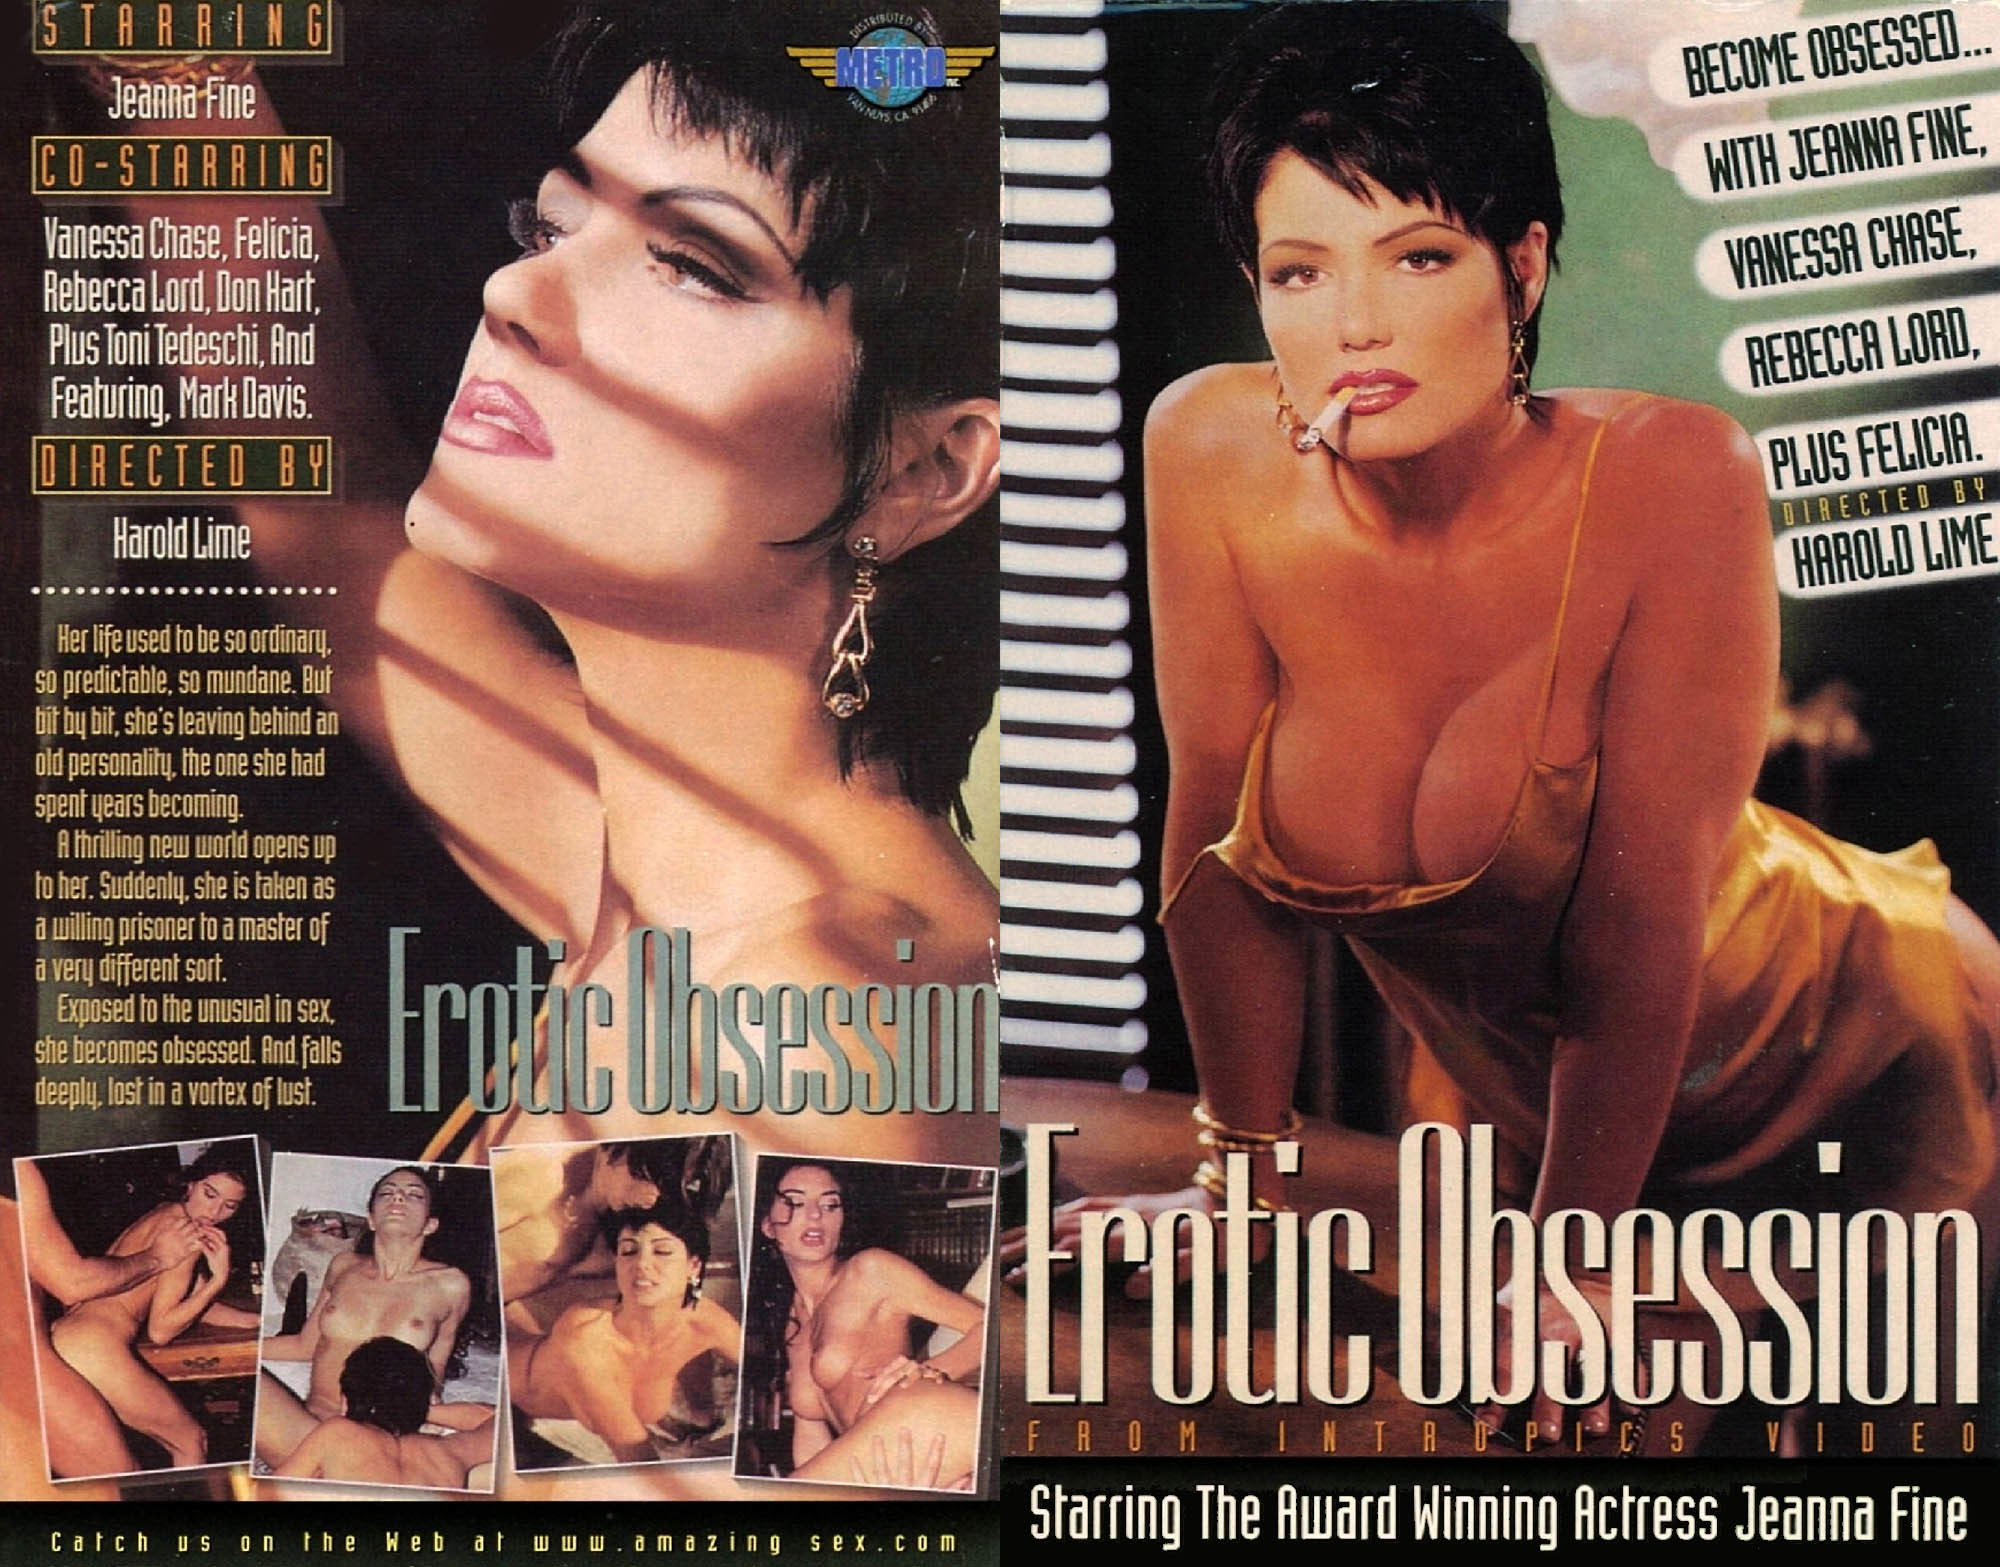 Erotic Obsession - 1995 - Harold Lime